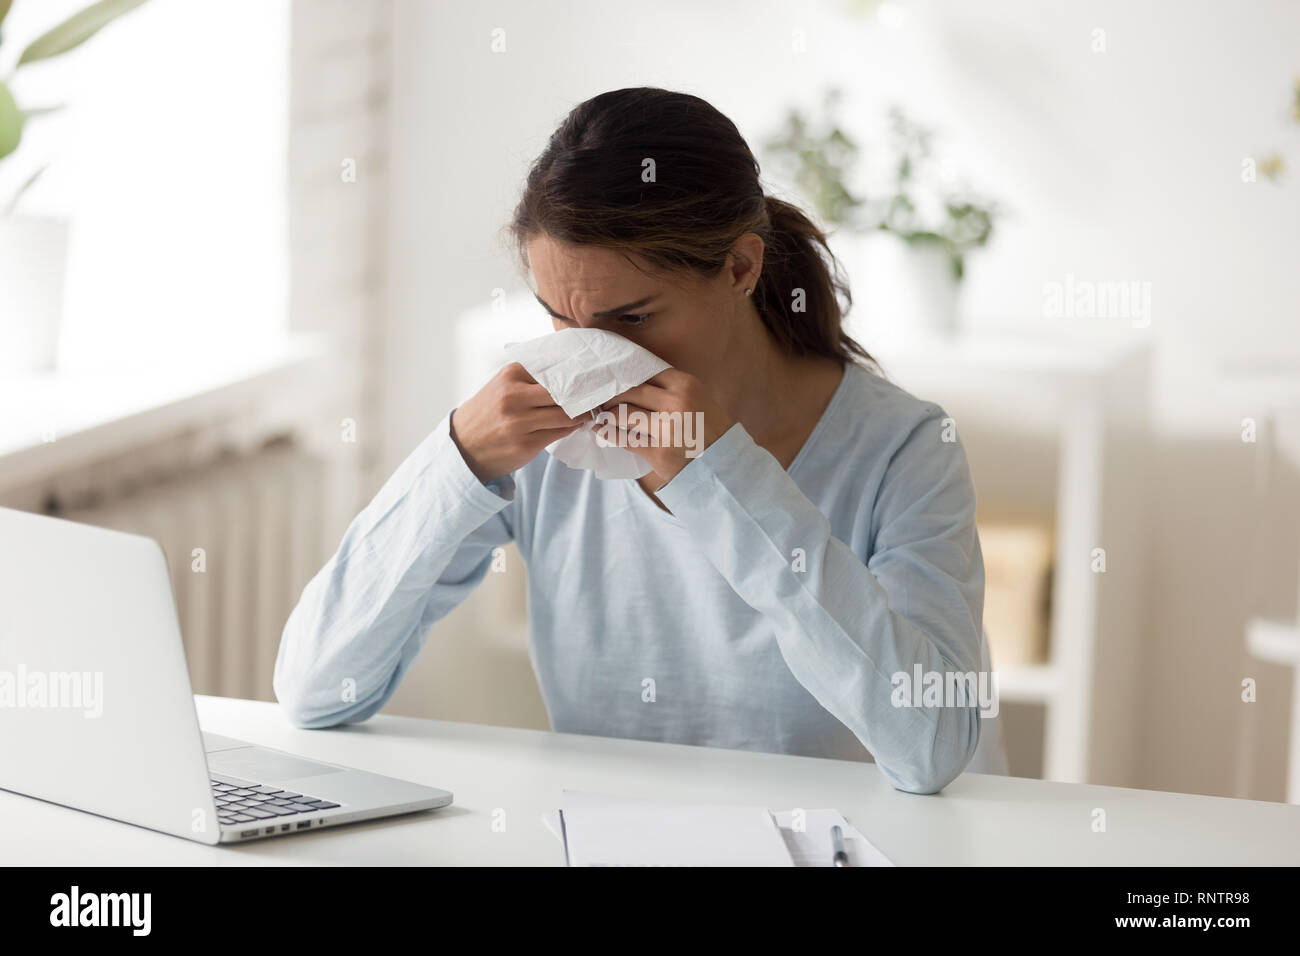 Unhealthy female sitting at workplace blowing nose Stock Photo